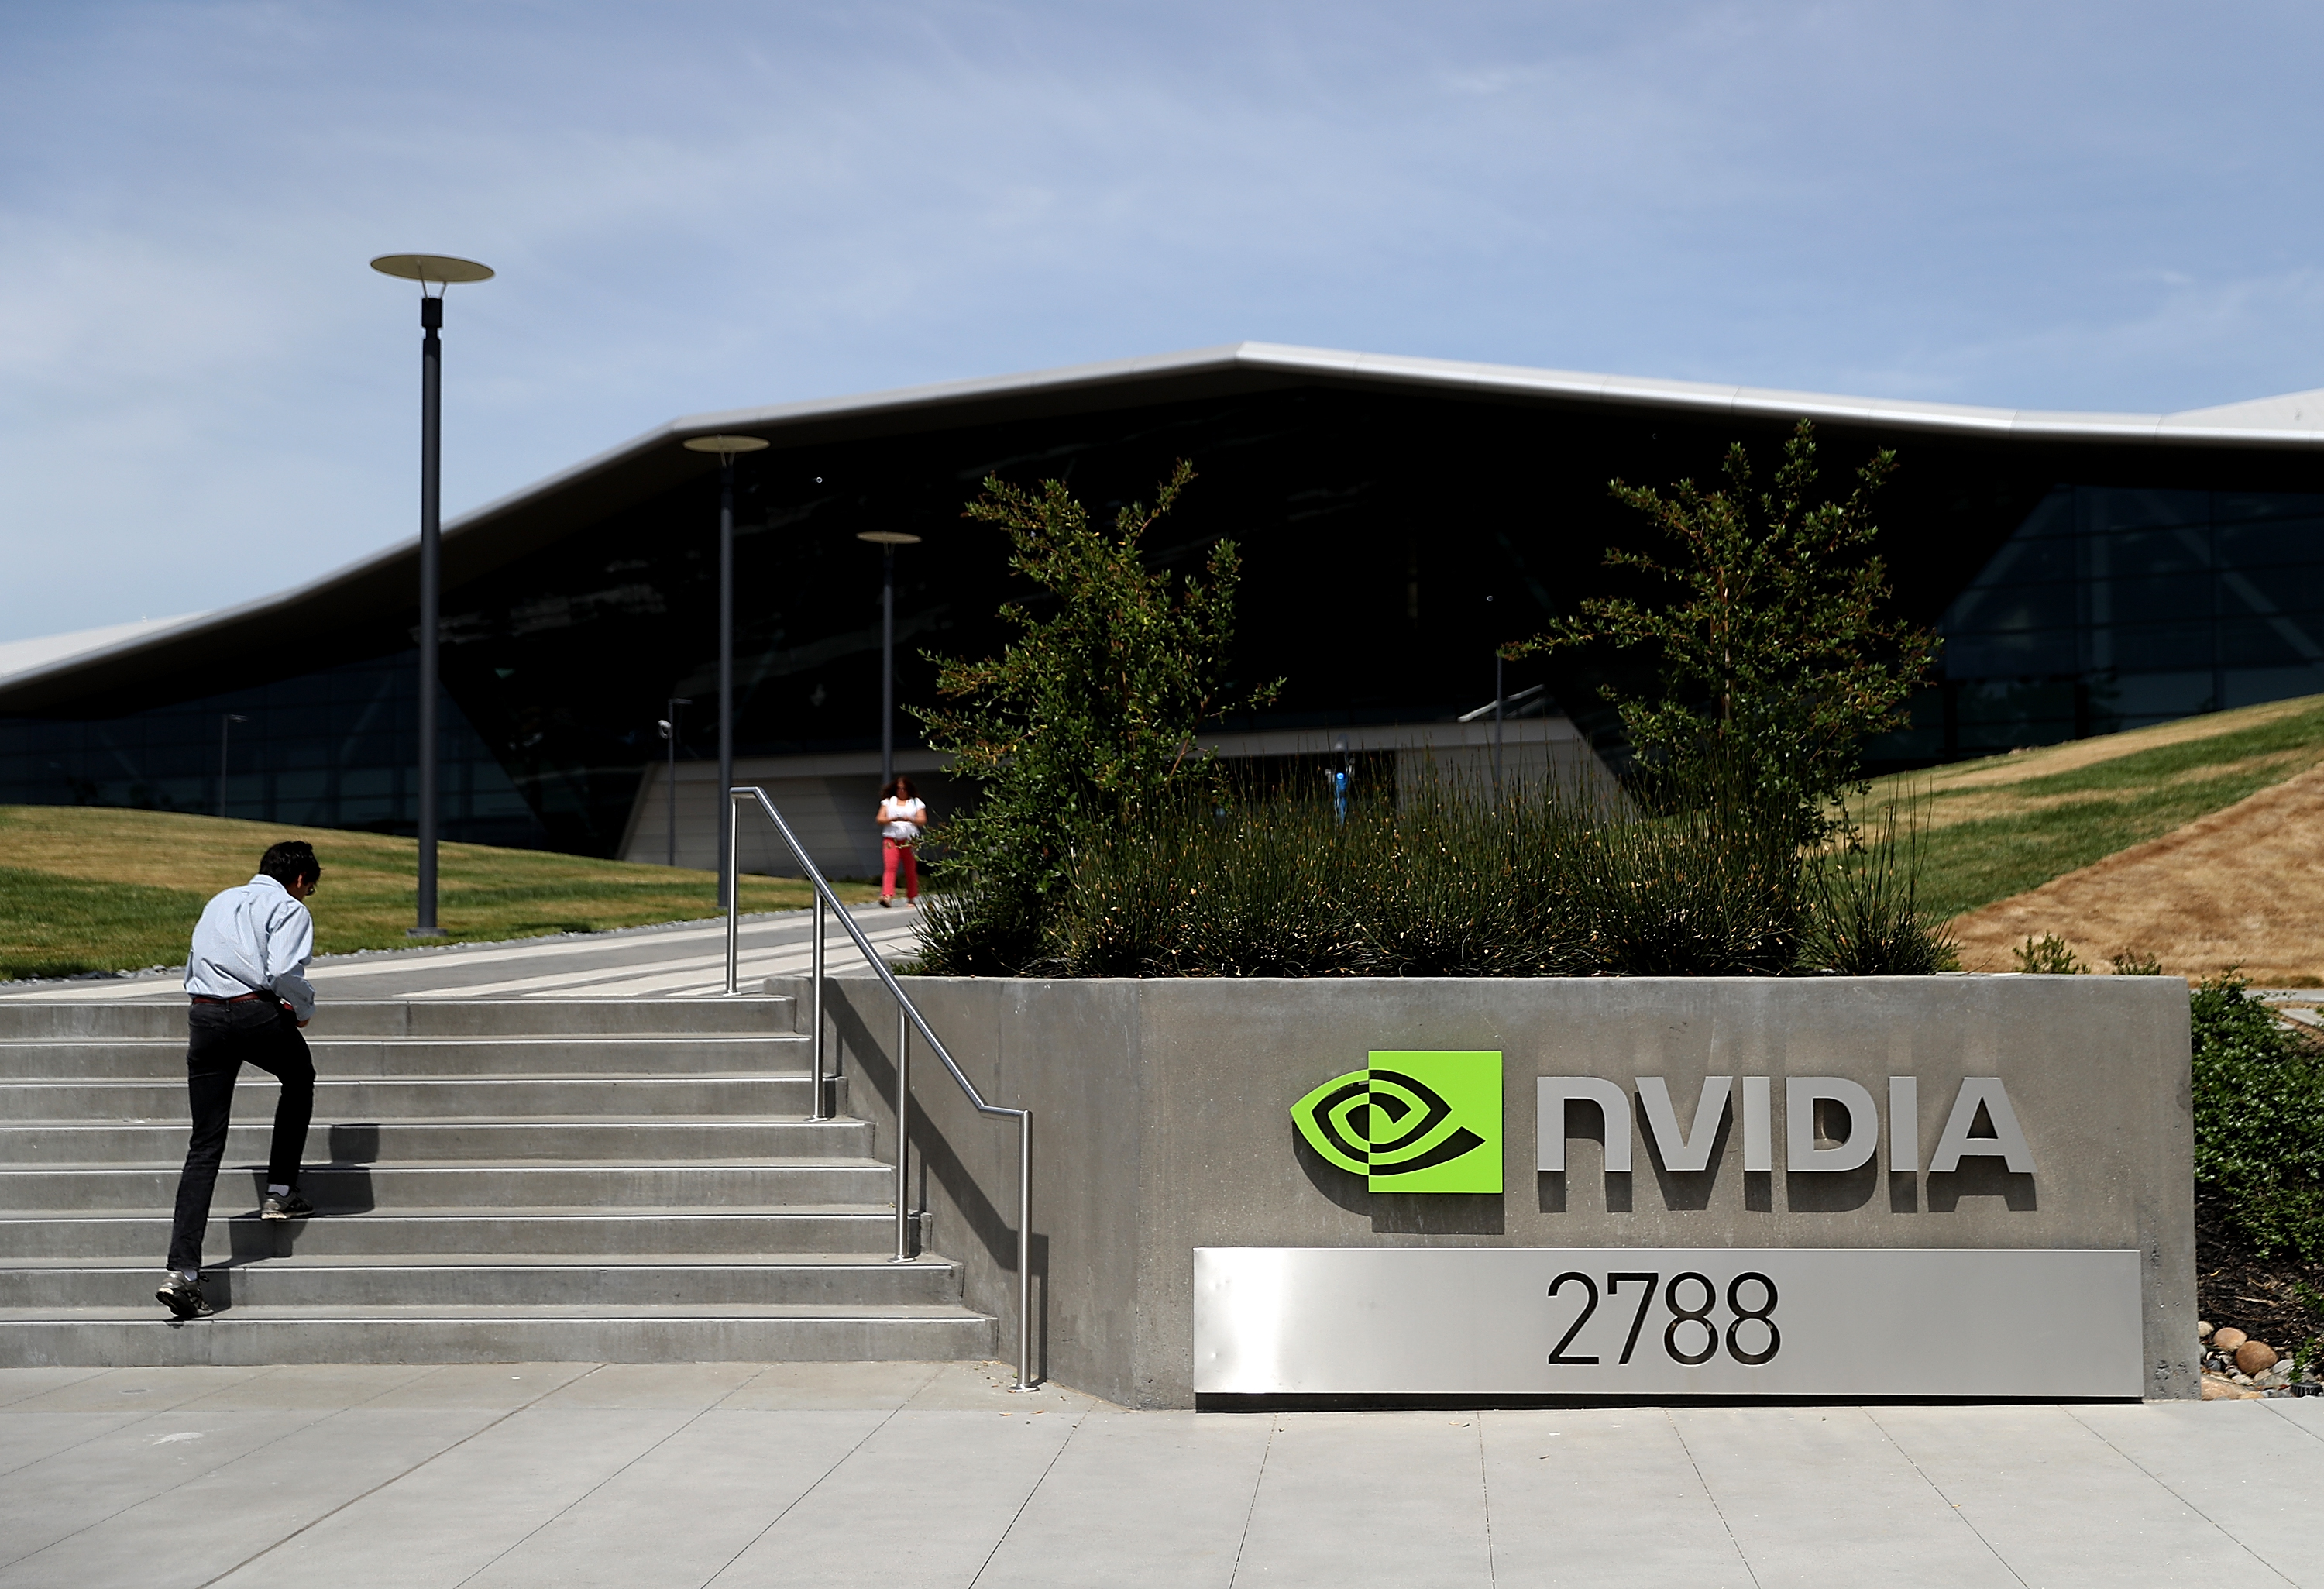 A man walks down steps at NVIDIA's modern office building entrance marked &quot;2788&quot; under a vibrant green logo. Another person stands in the background.